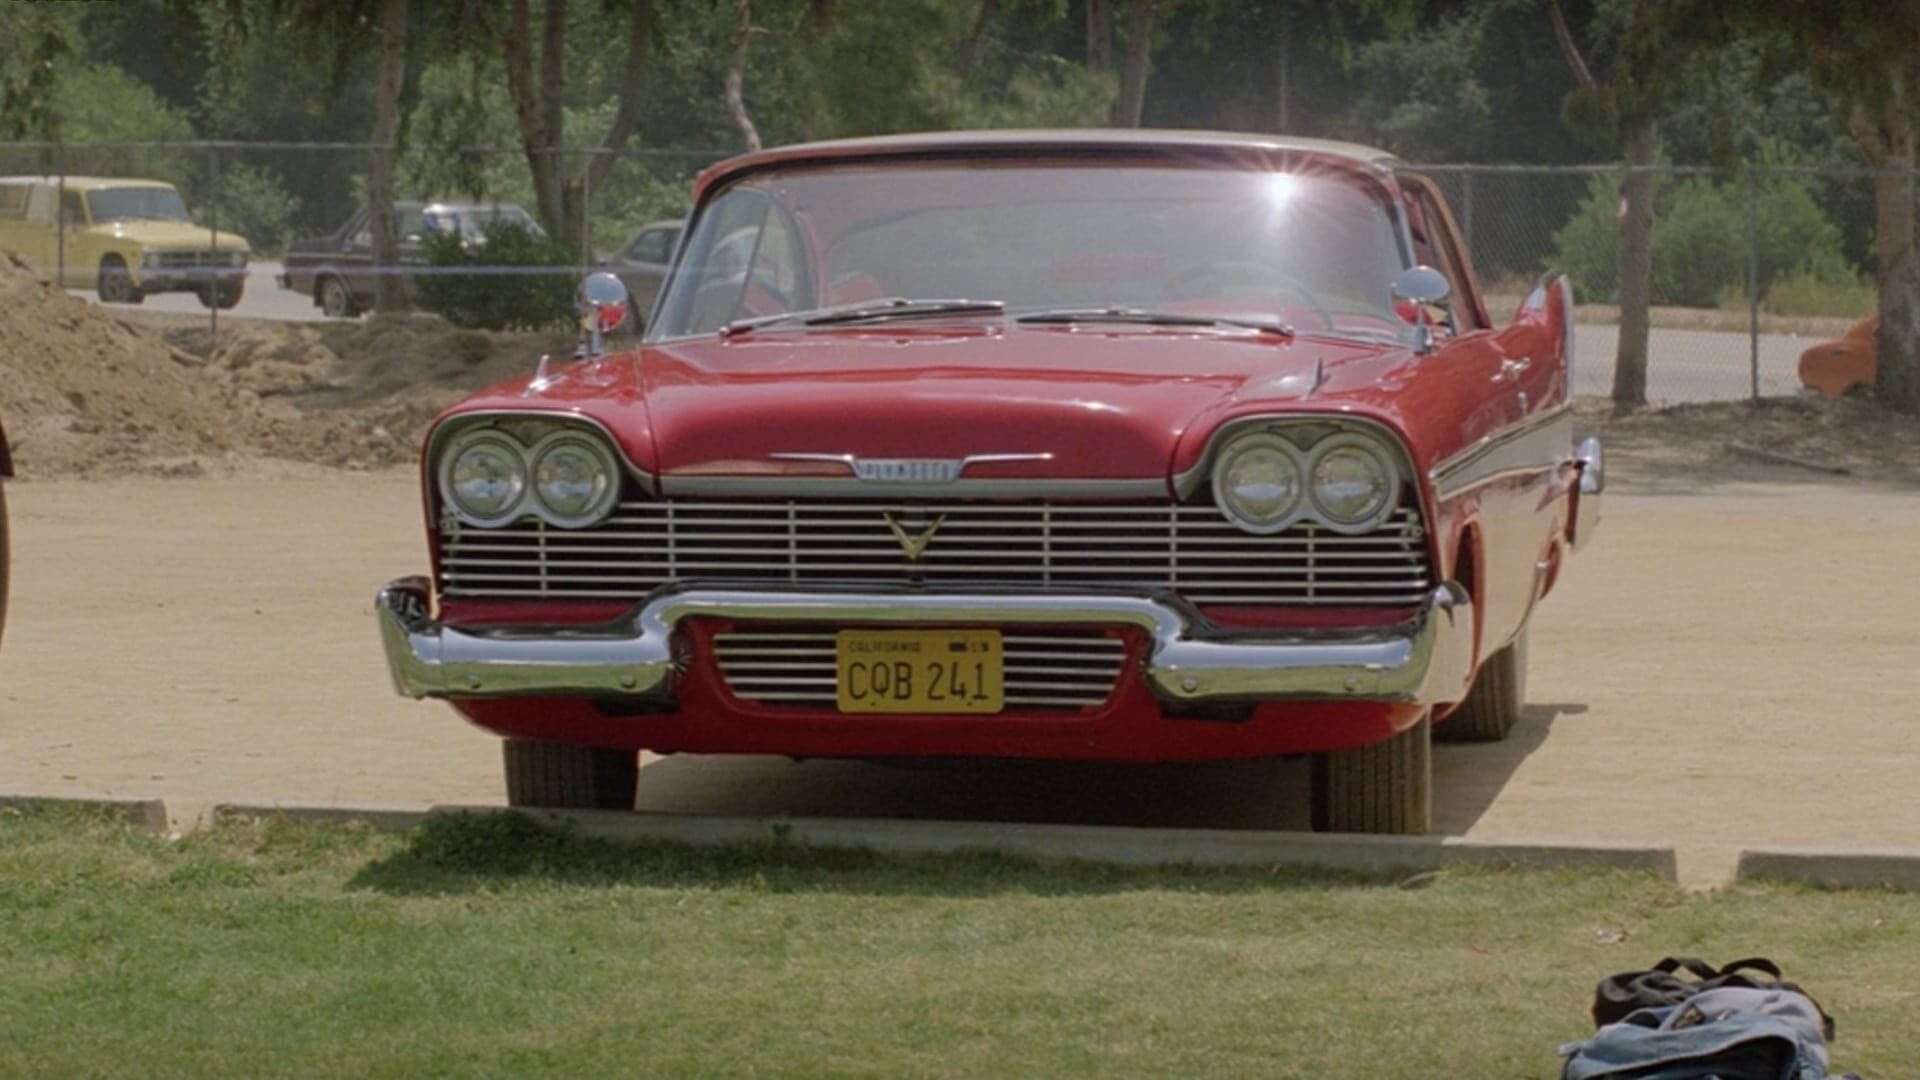 Screenshot from the film Christine. A shiny red 1958 Plymouth Fury sits in a parking lot.